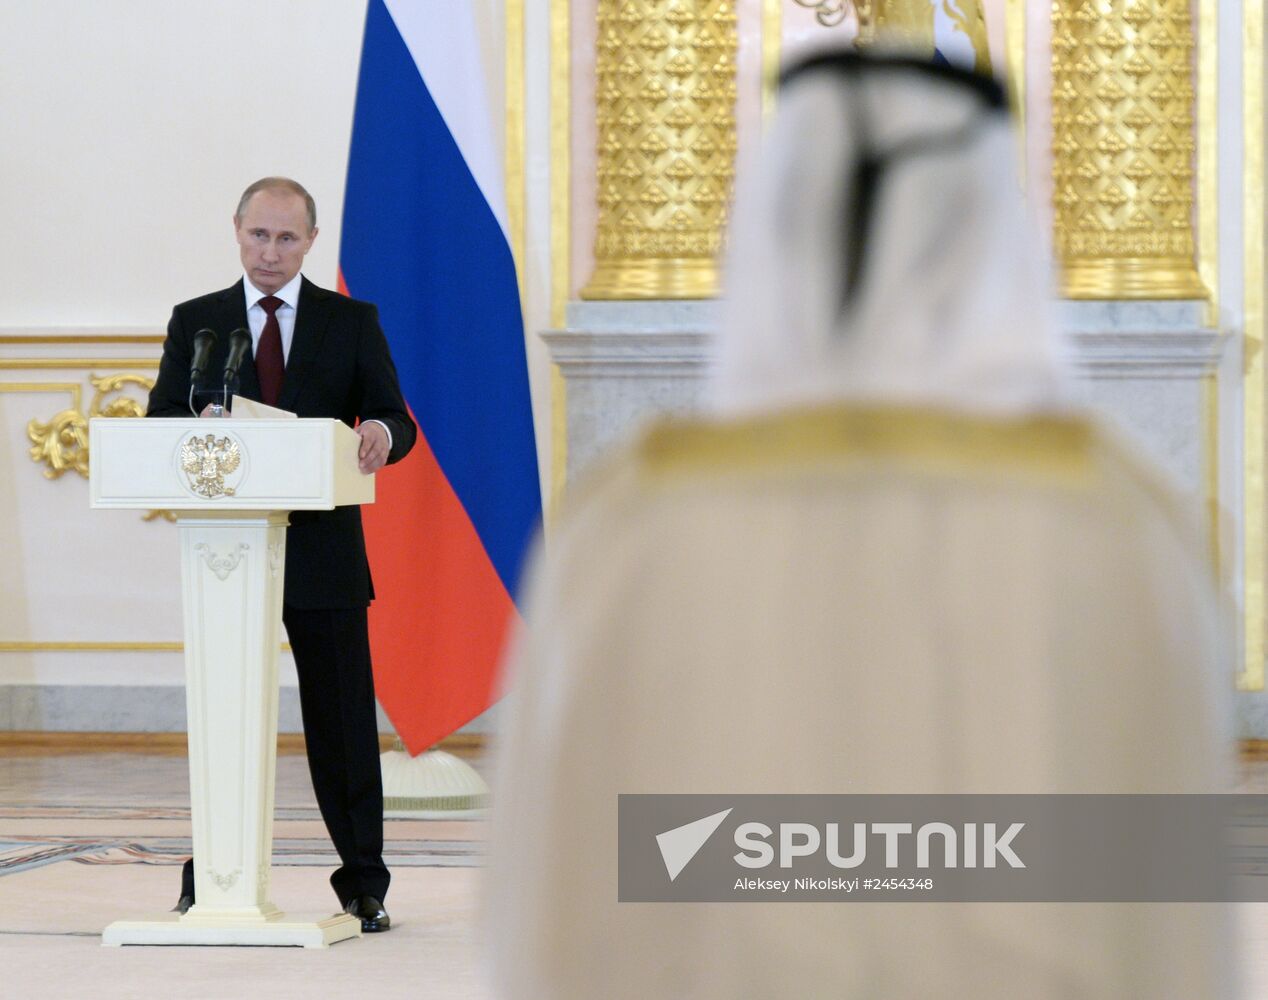 Ceremony of presenting credentials to Russian President Vladimir Putin